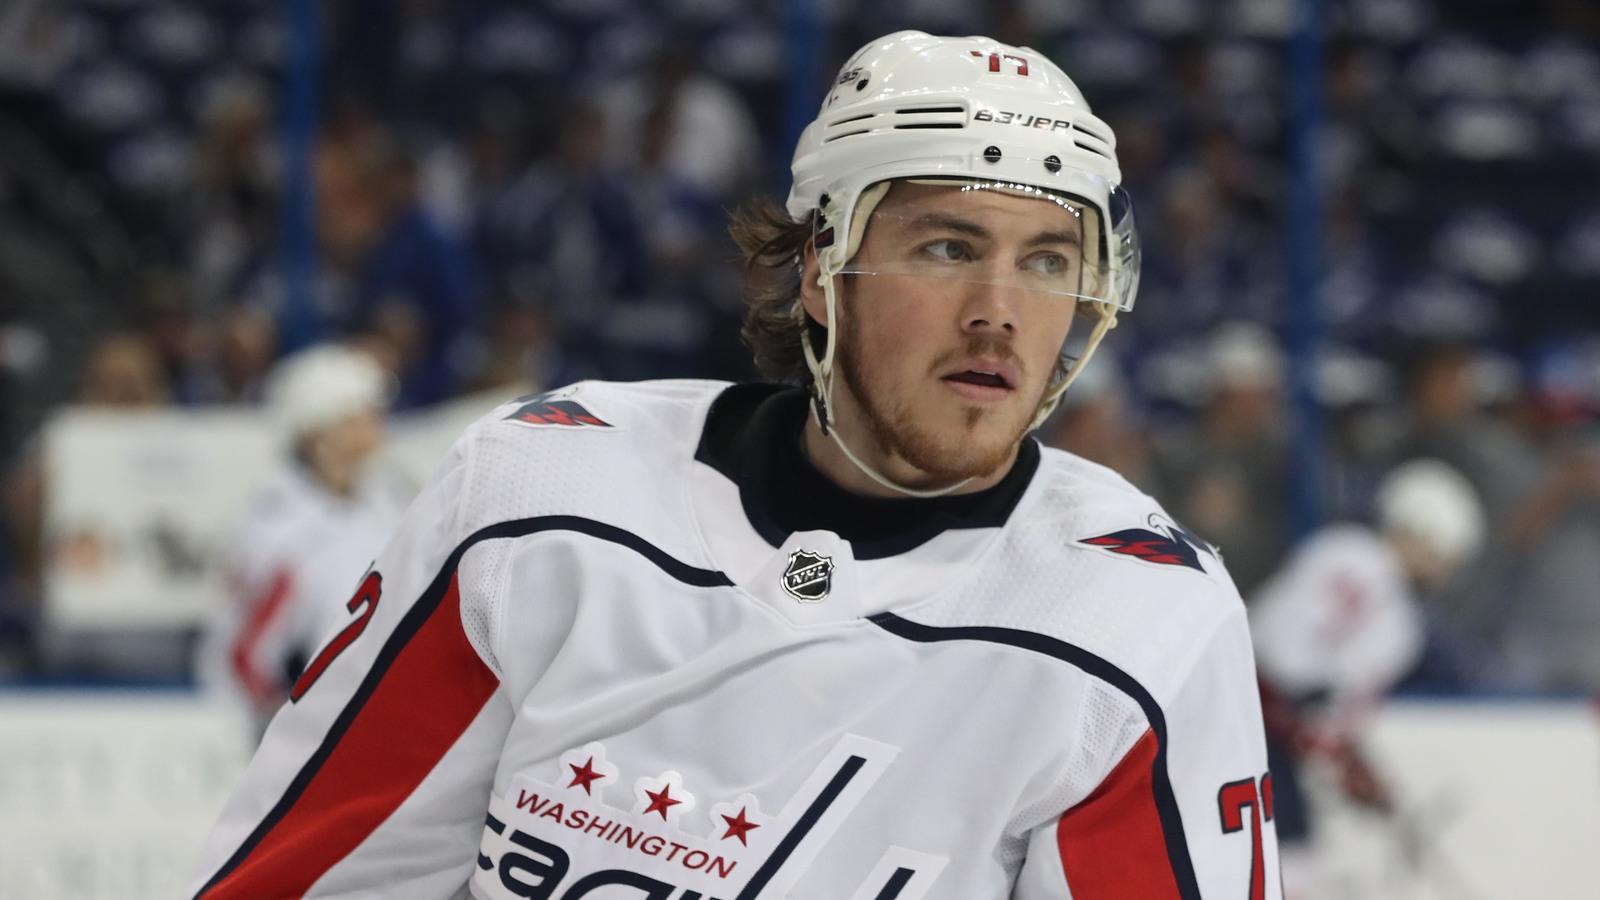 TJ Oshie says past heartbreak has made Capitals stronger.